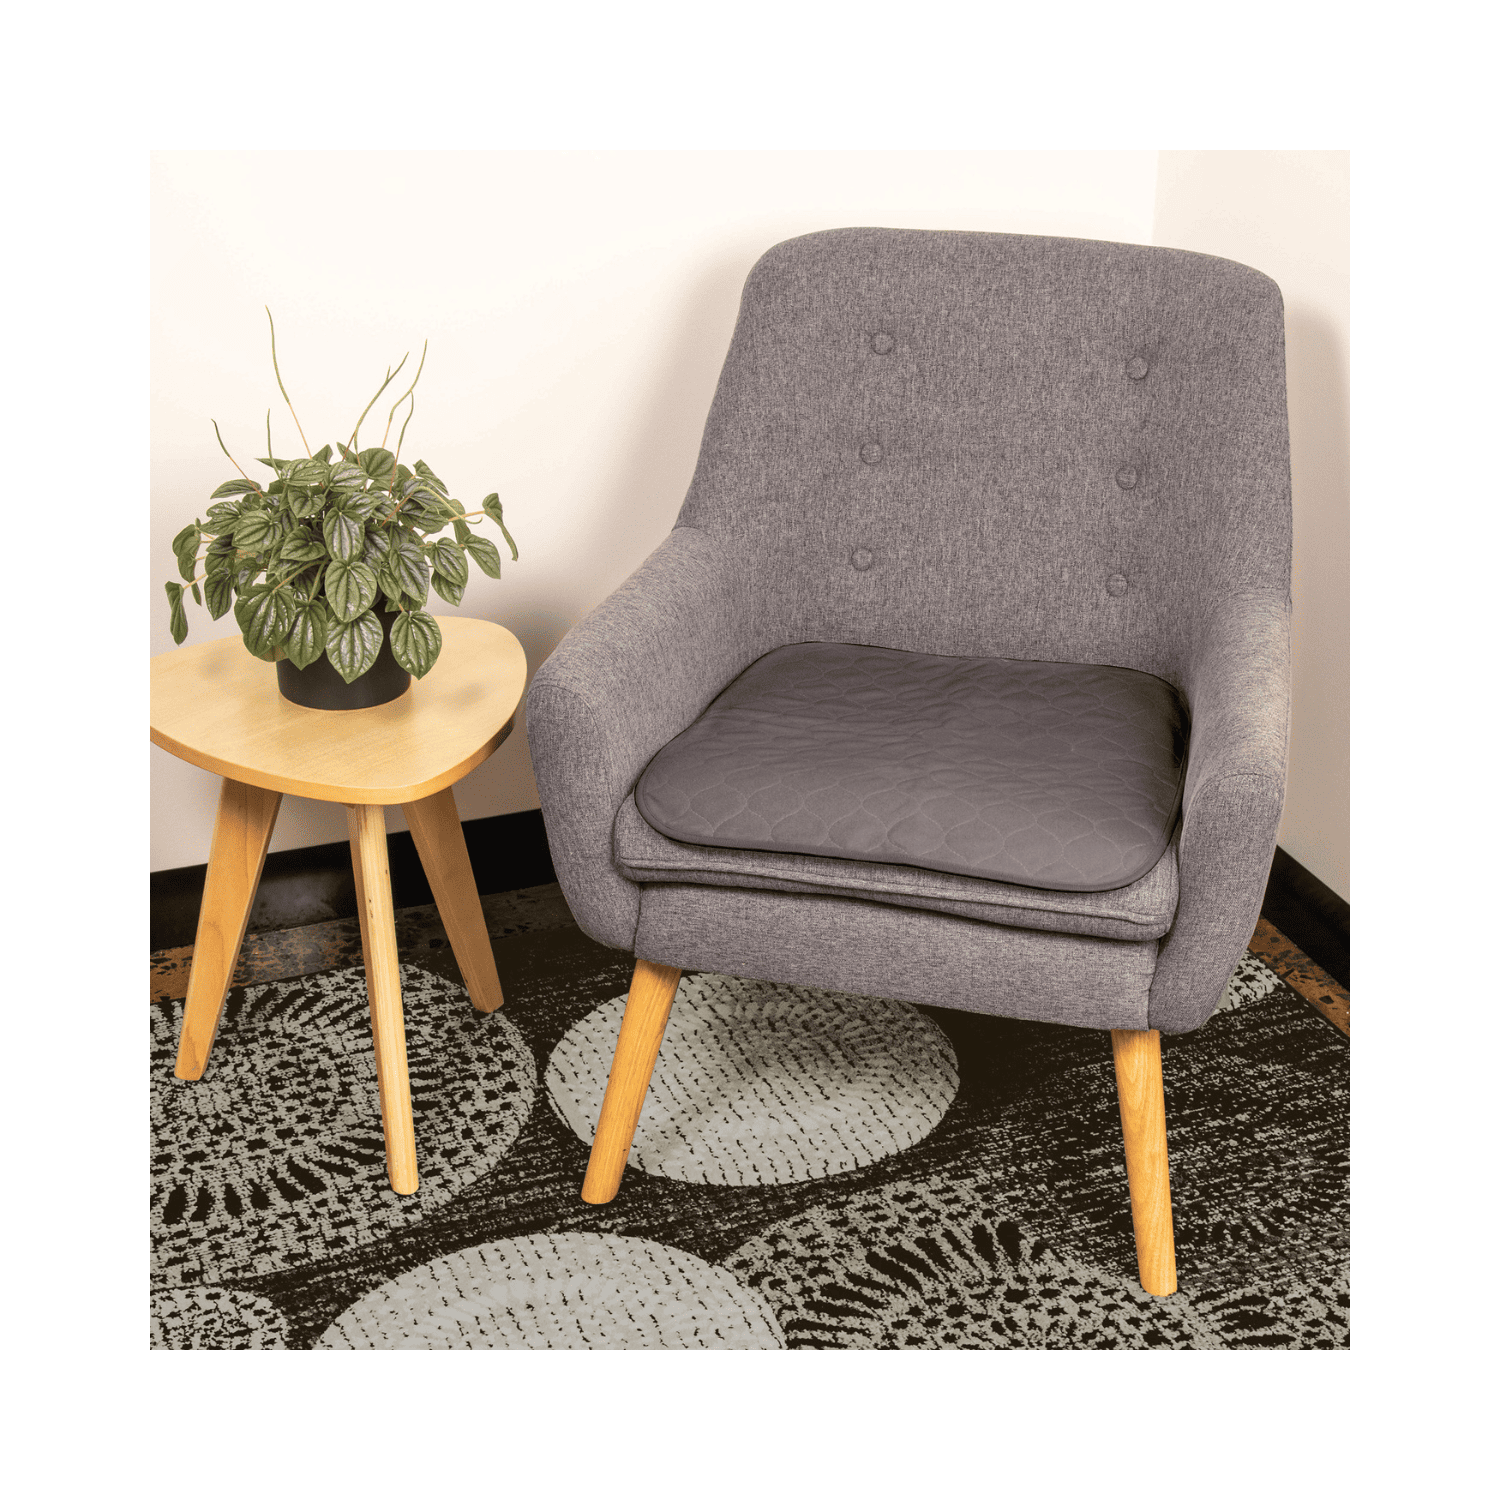 Conni Chair Small – Charcoal